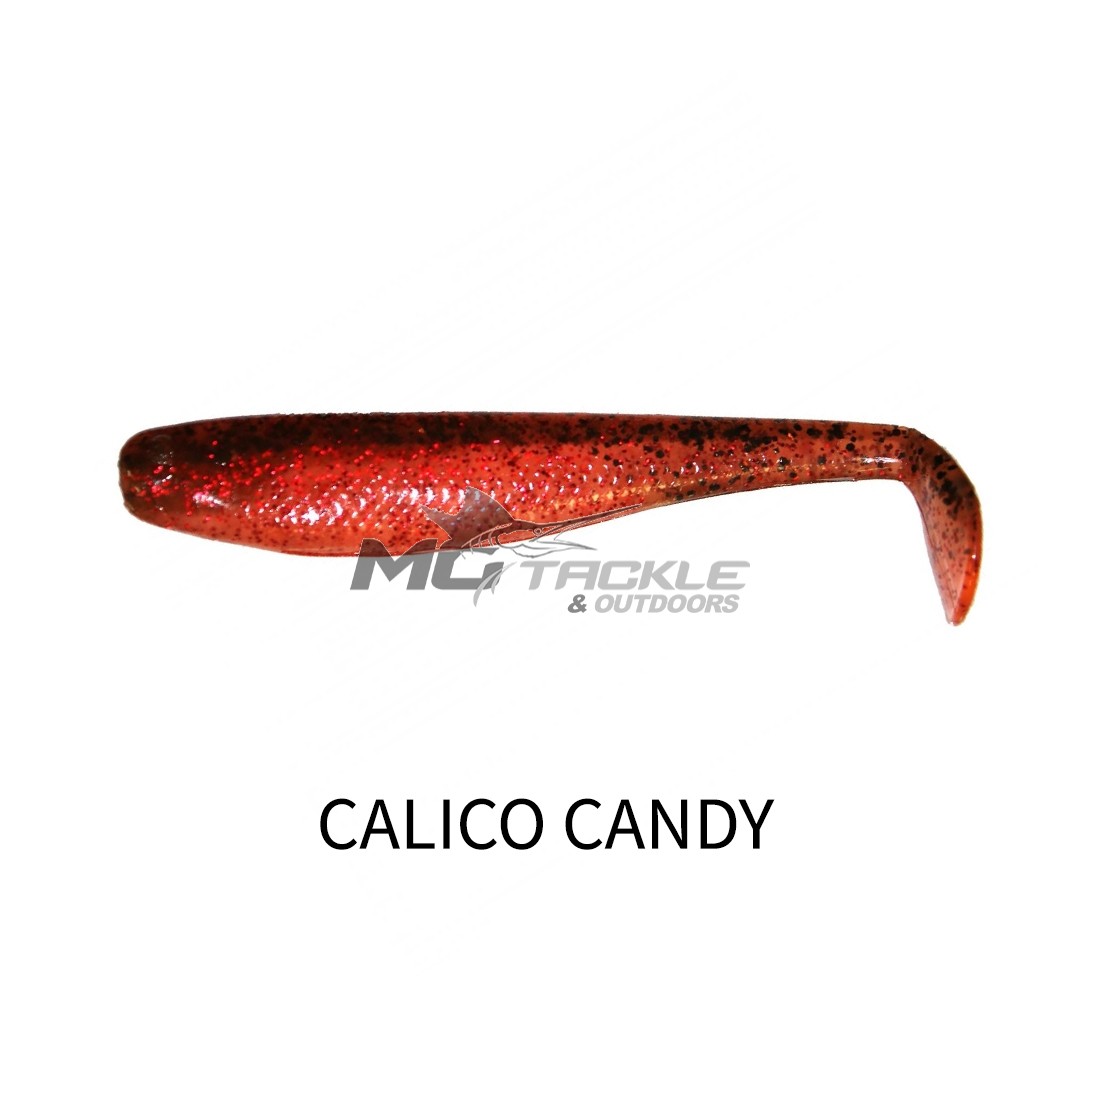 10cm and 7.5cm hard lure molds